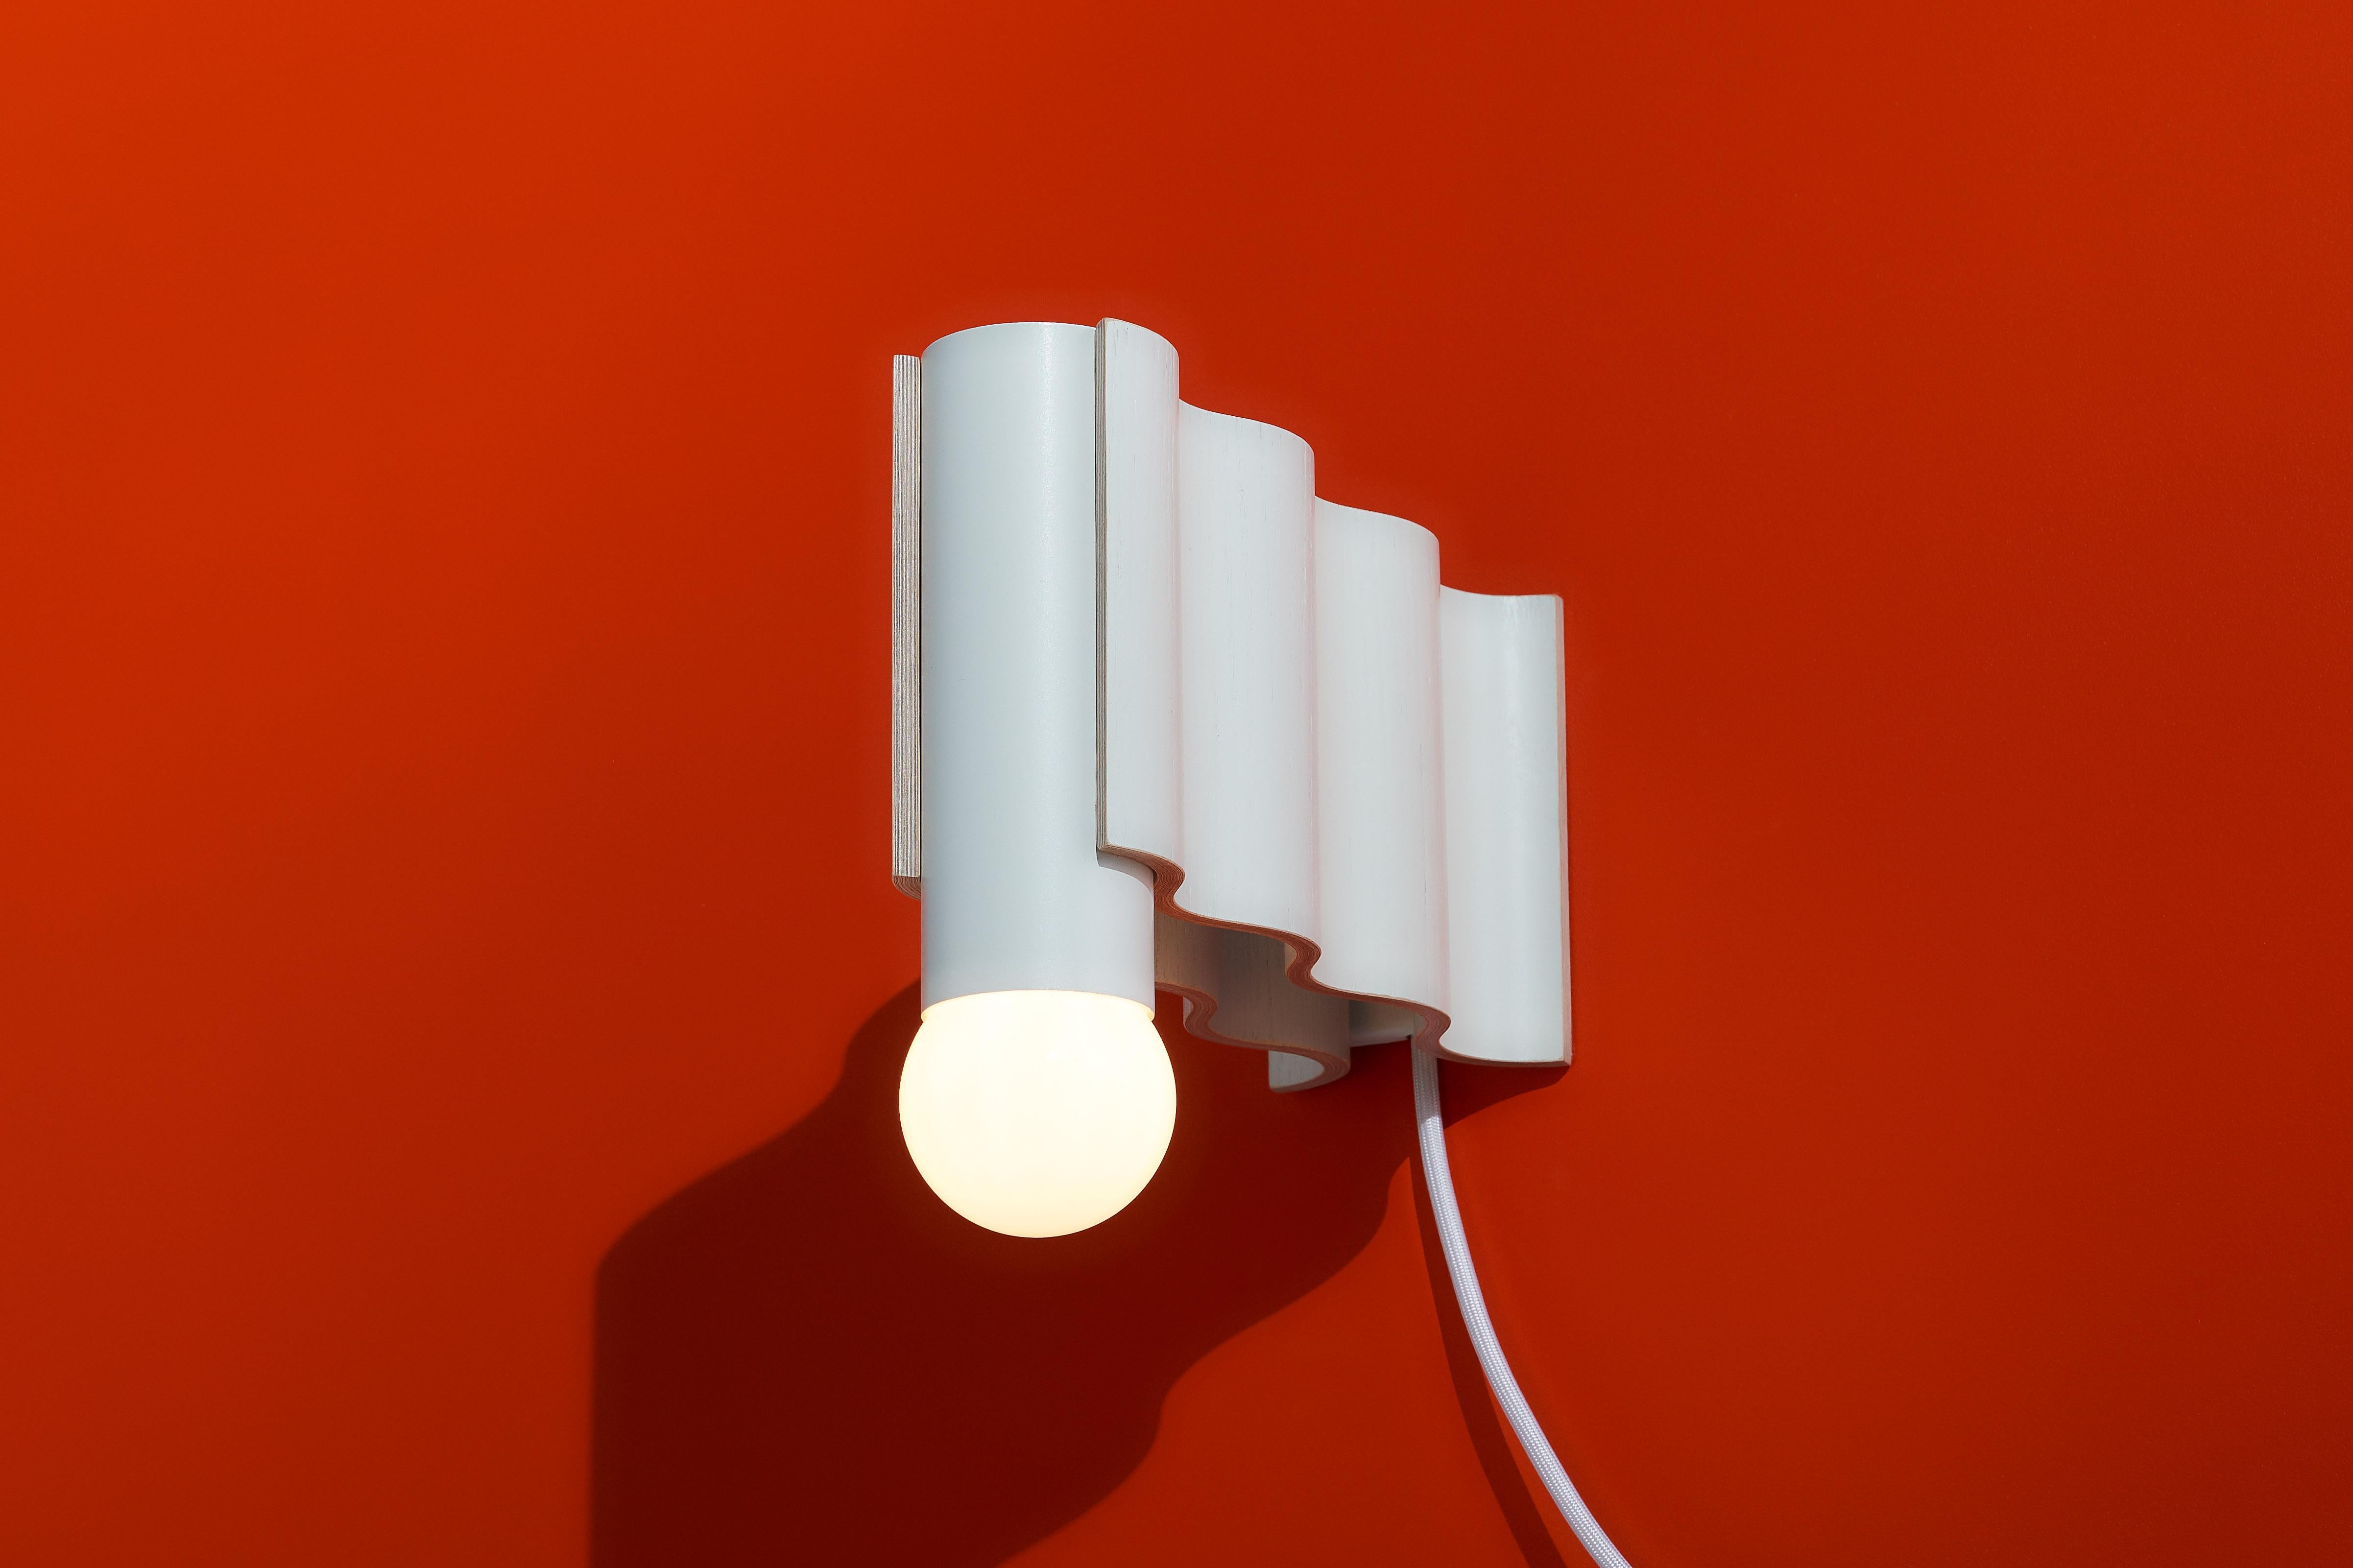 Corrugation lights single sconce by Theodora Alfredsdottir 
Collaboration with Tino Seubert
Unique piece
Materials: Ash and aluminum
Dimensions: 

Theodora Alfredsdottir is a product design studio based in London. 
Theodora is an Icelandic